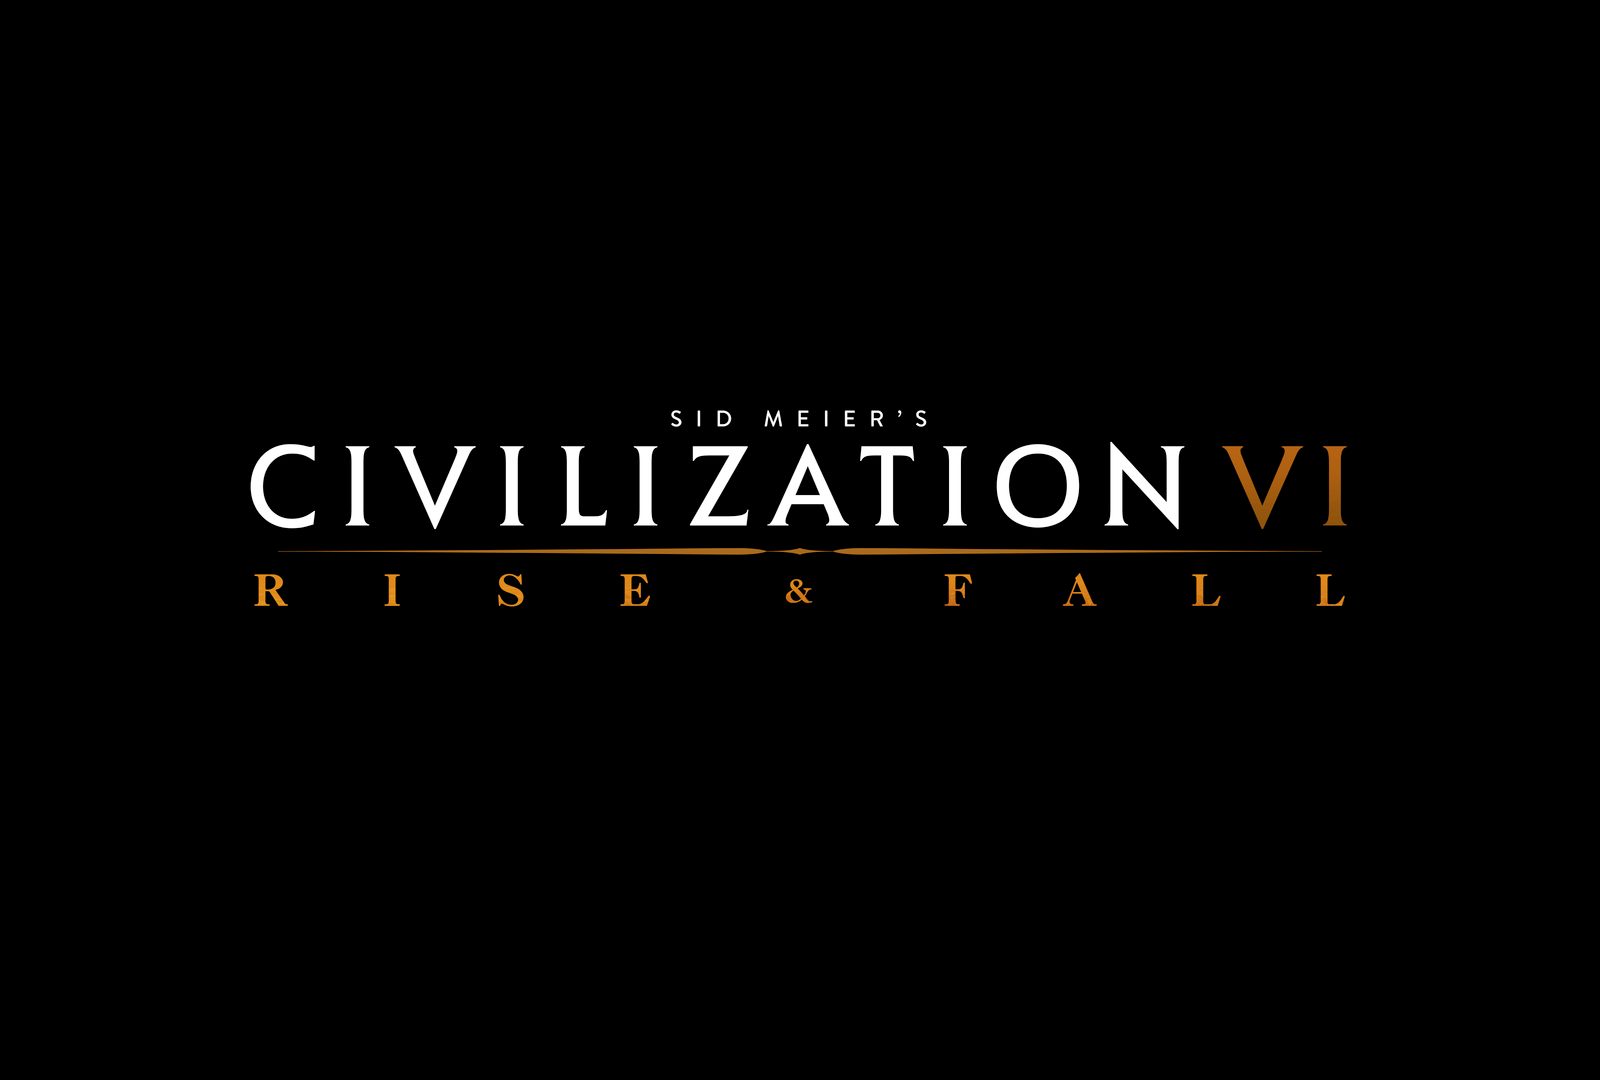 Civilization VI Rise and Fall Expansion Revealed; First Released